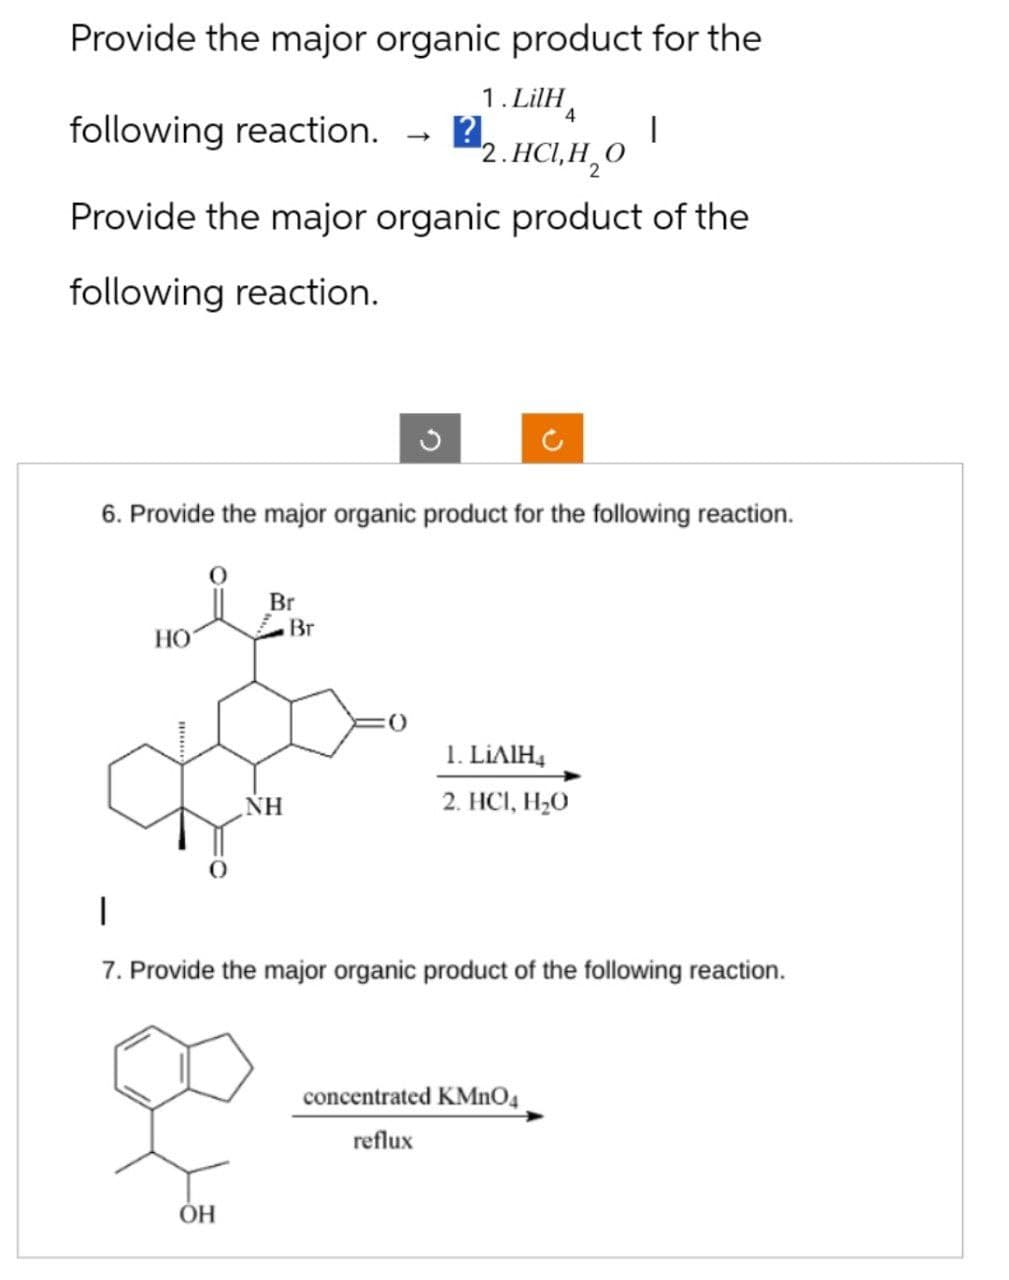 Provide the major organic product for the
1. LilH
4
2.нсін, о
Provide the major organic product of the
following reaction.
following reaction. ?.
6. Provide the major organic product for the following reaction.
HO
Br
OH
NH
-
Br
1. LIAIH4
2. HC1, H₂O
7. Provide the major organic product of the following reaction.
concentrated KMnO4
reflux